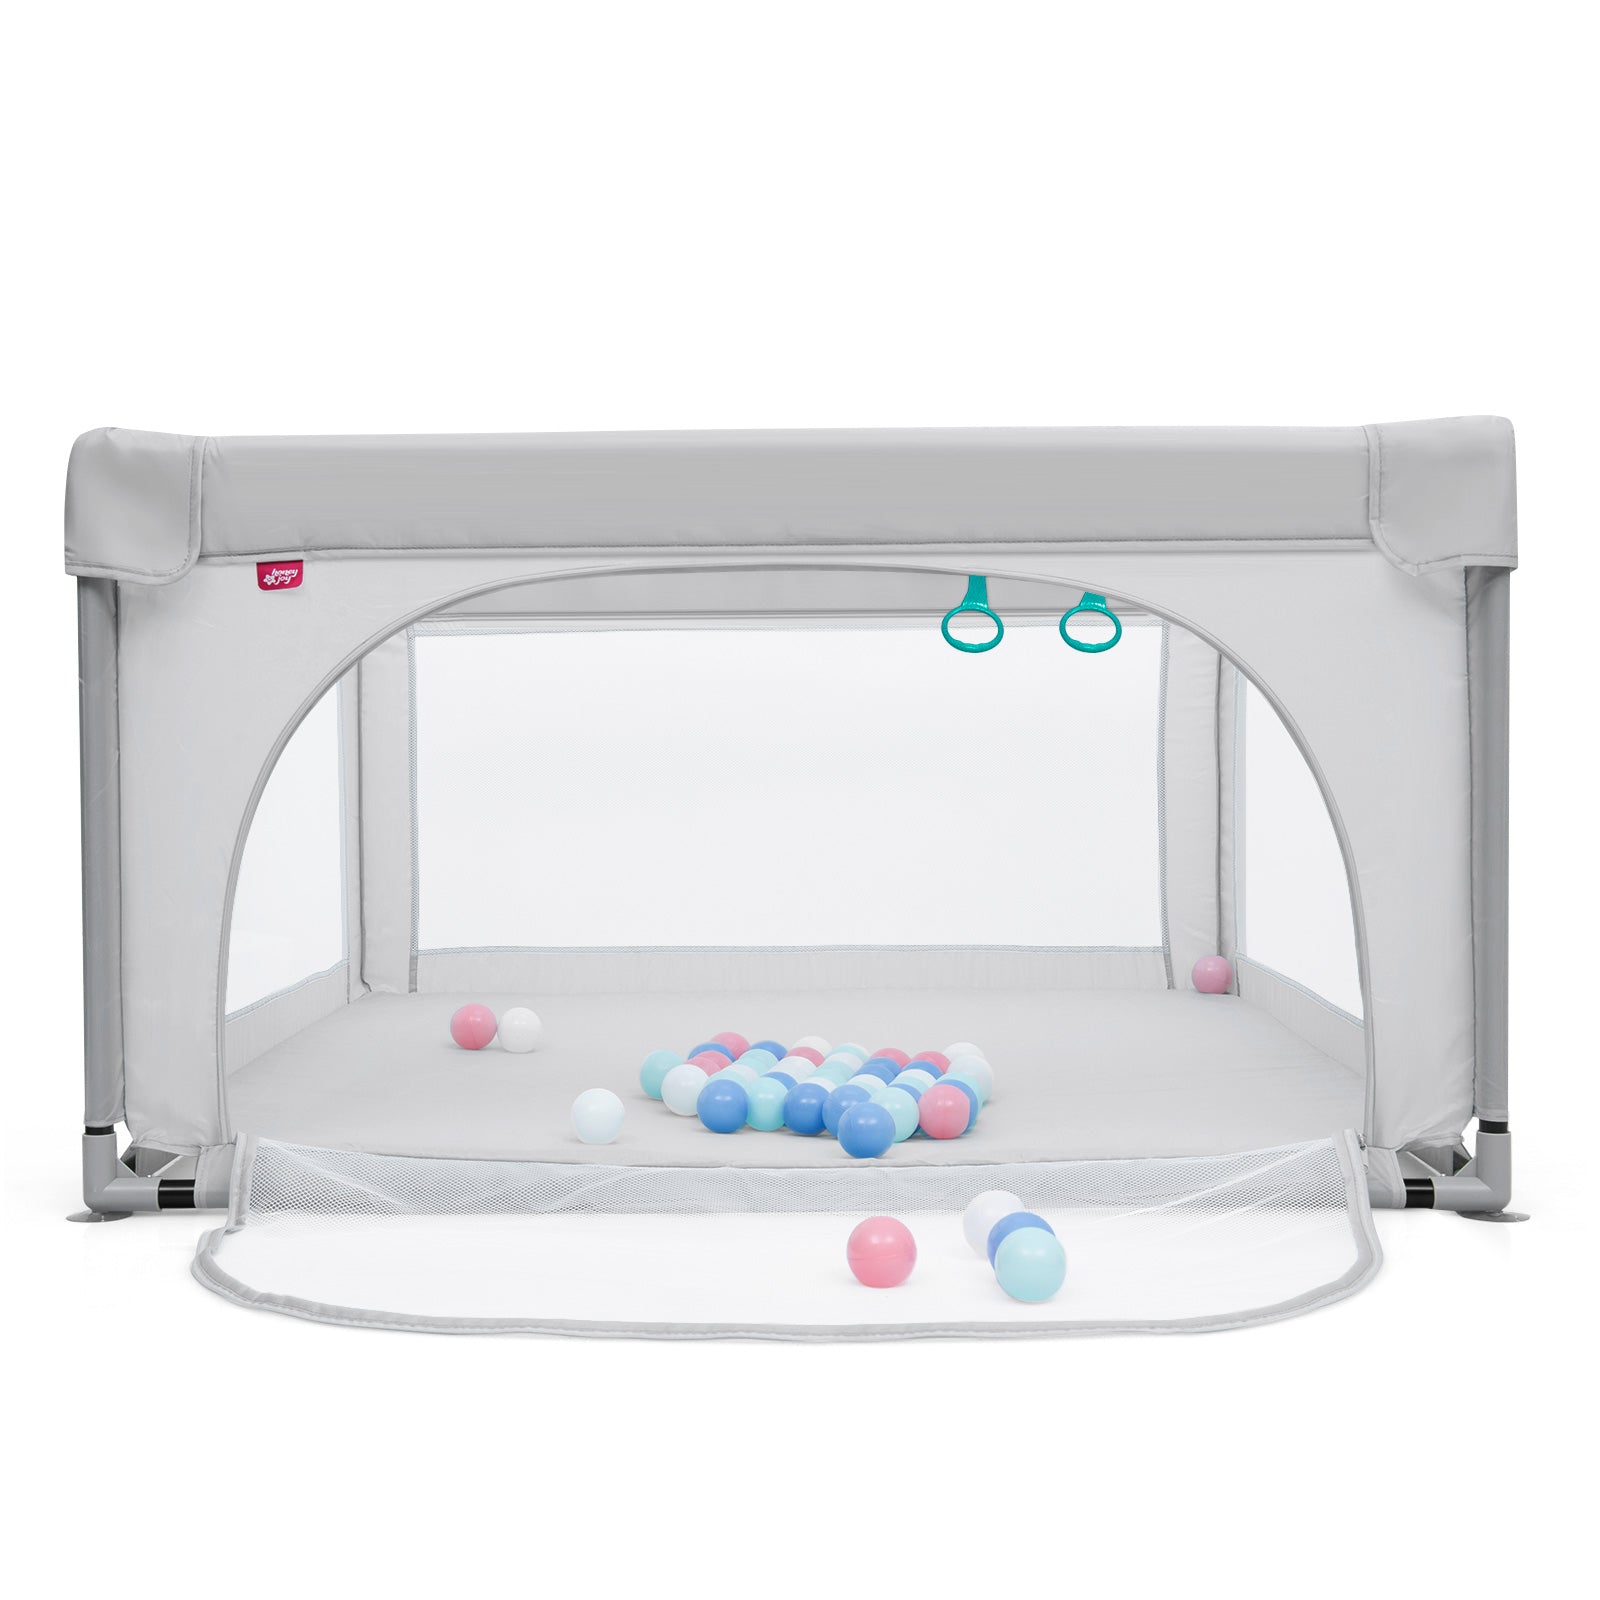 Grey Baby Playpen - The Perfect Playtime Solution